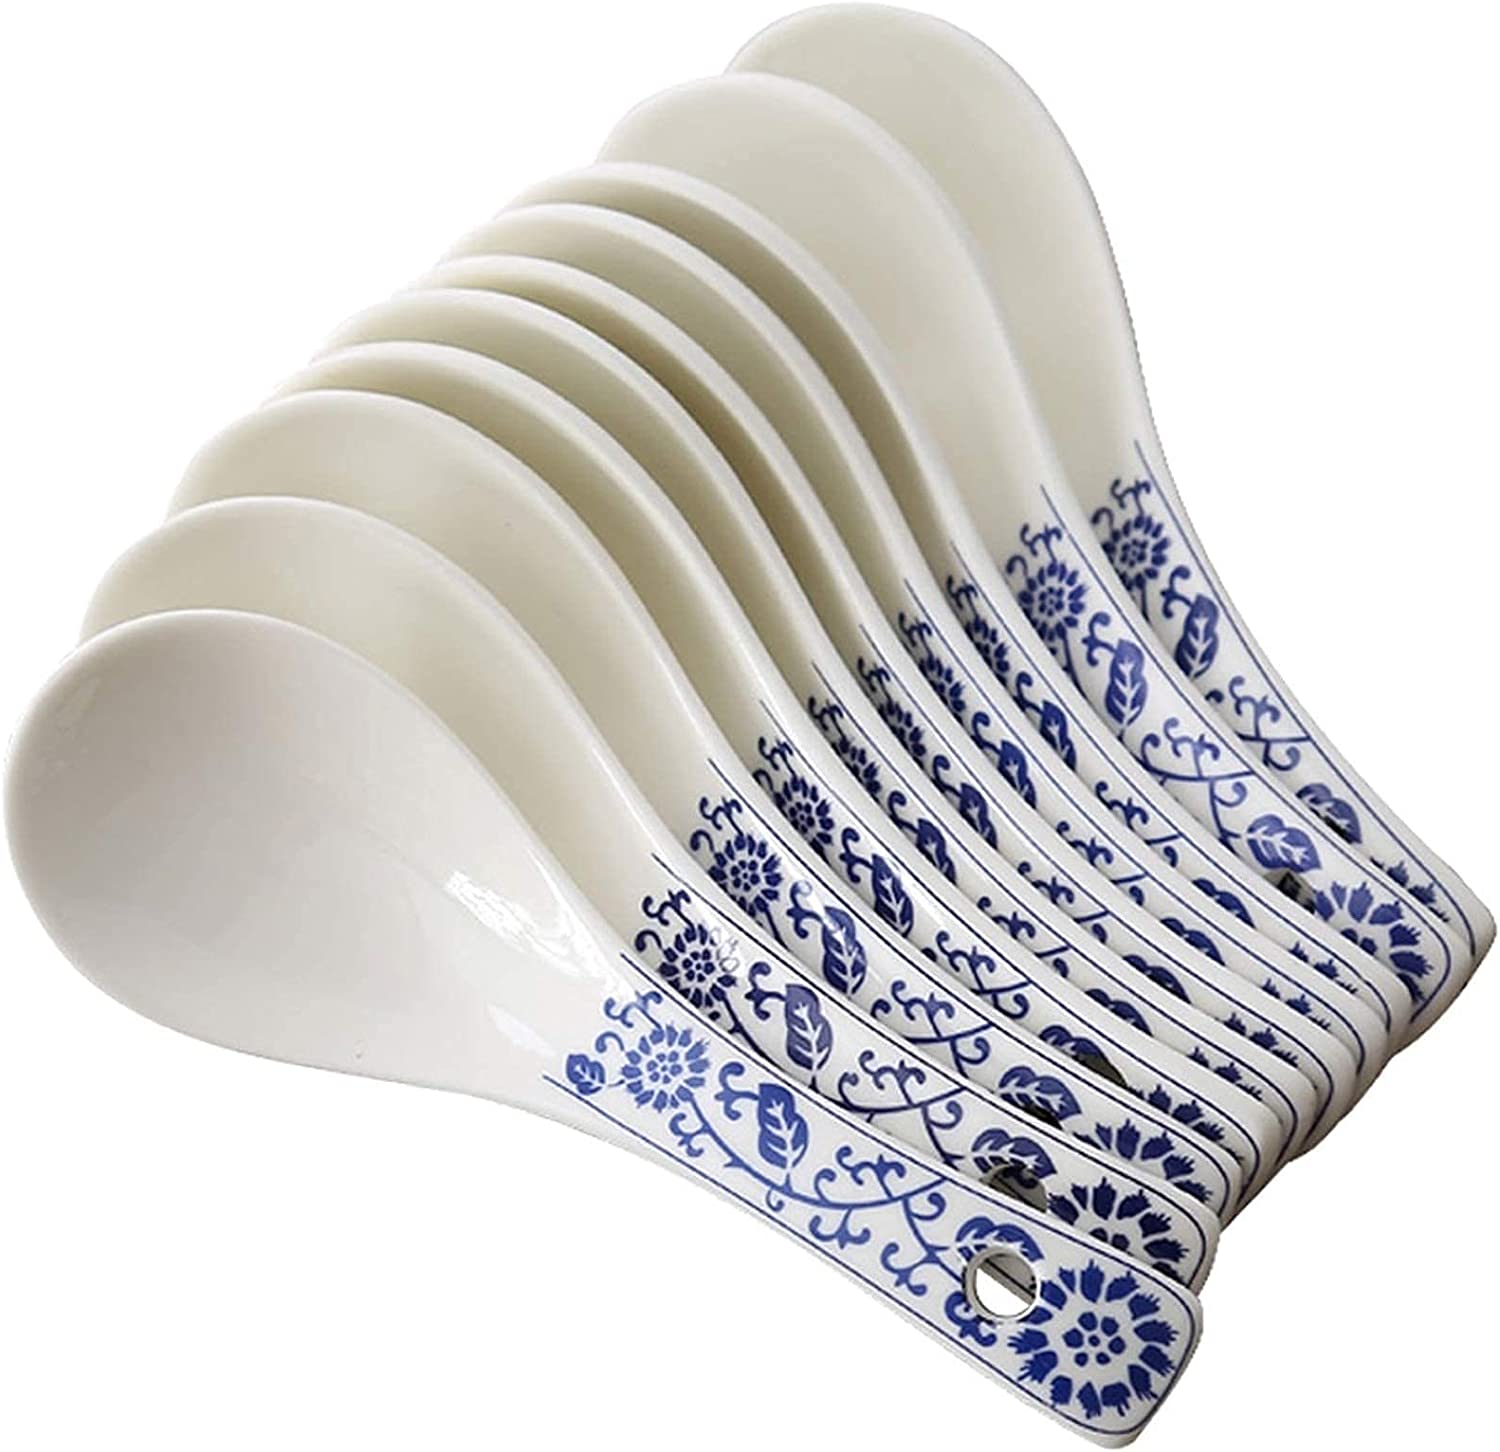 Pho spoon, Soup Ladle Hand-painted Blue And White Porcelain Ceramic Soup Spoon Set Household Soup Spoon 10 Piece Set 5.3 Inches Long Stainless Steel Soup Ladle